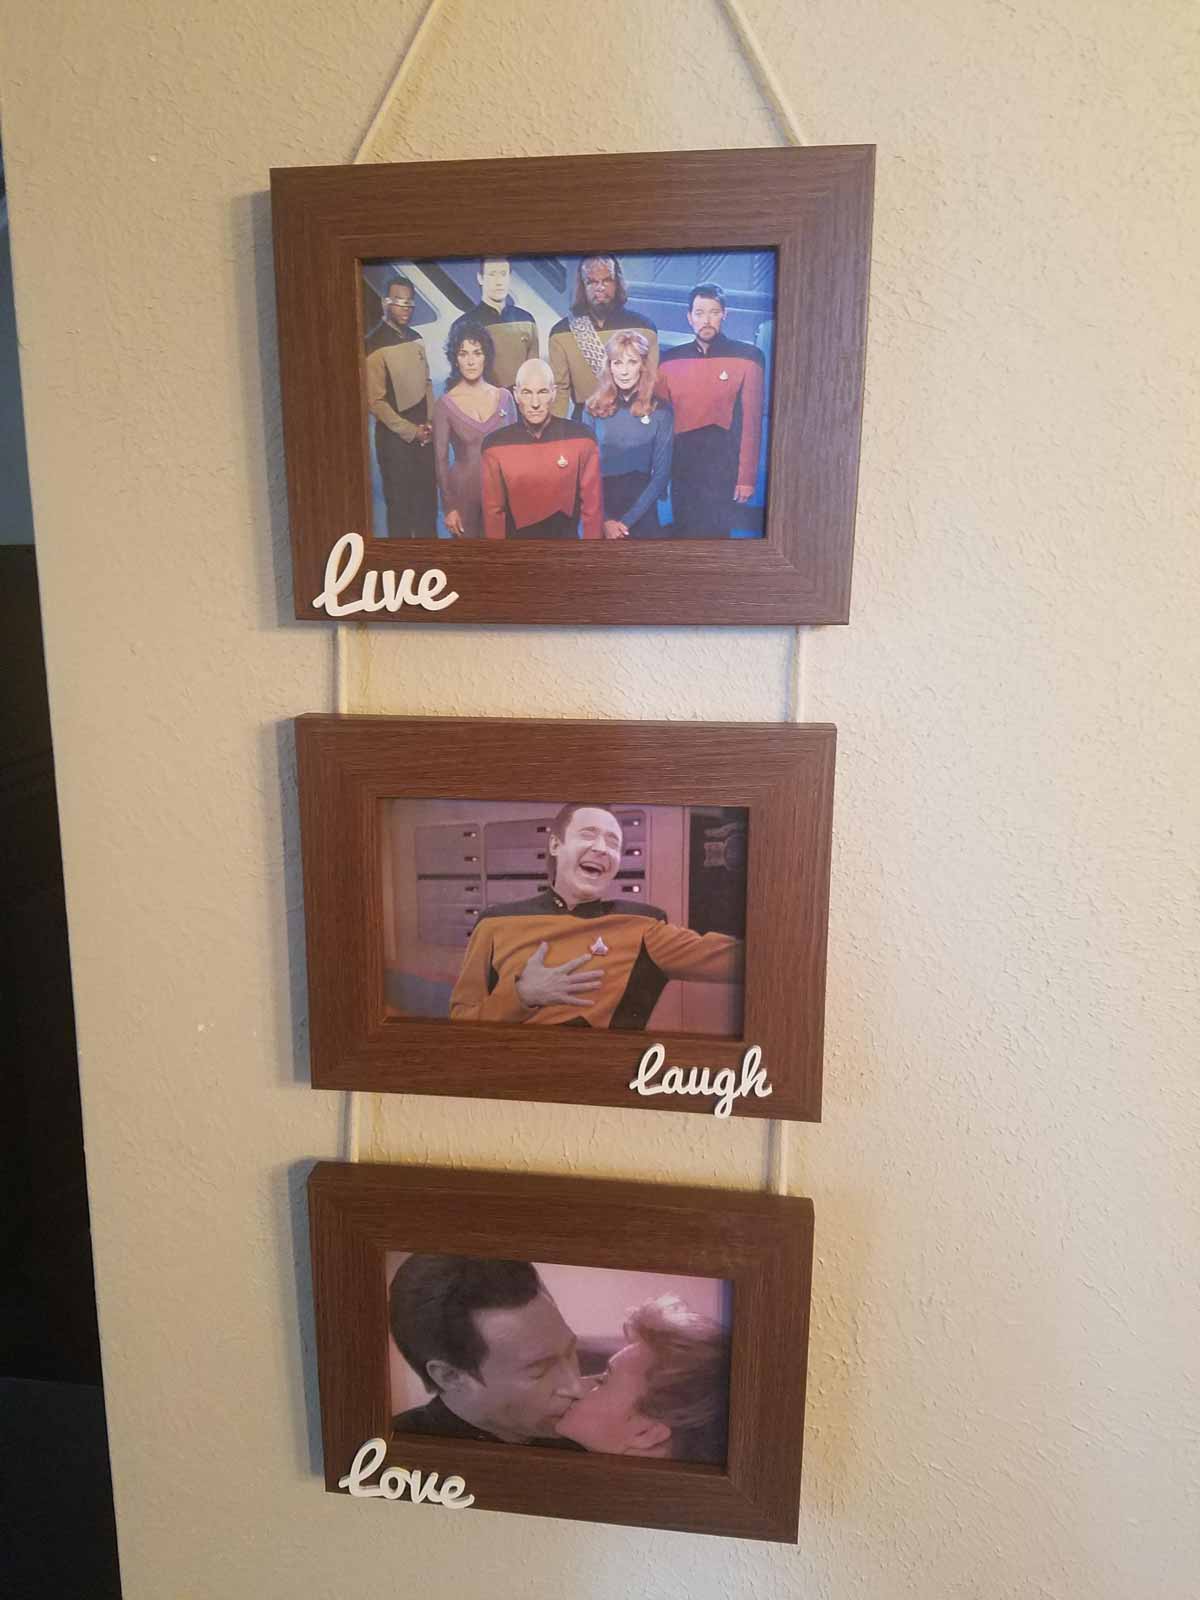 A hanging Live Laugh Love sign in a home where data from Star Trek TNG is in each of the frames